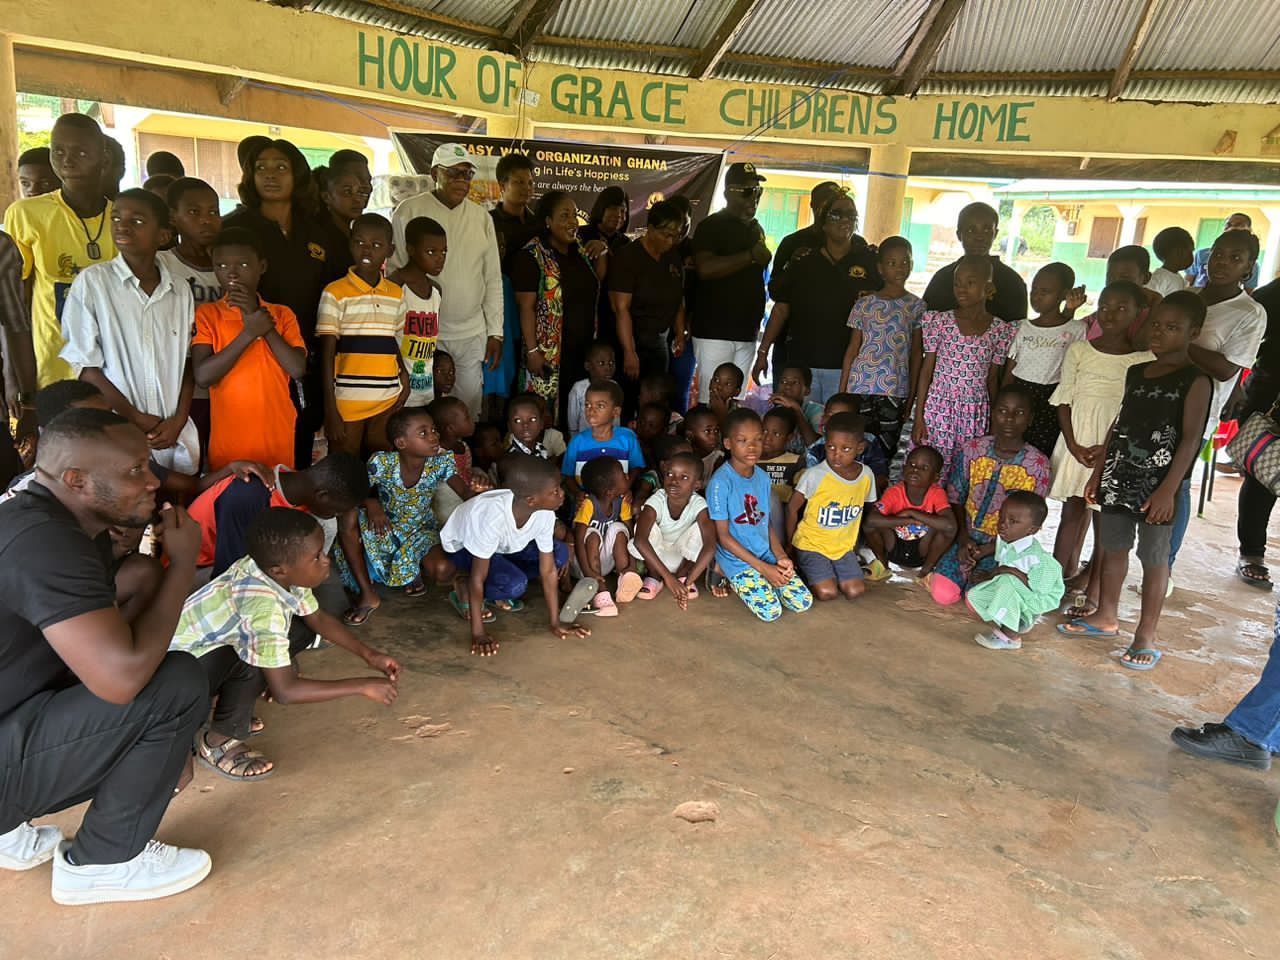 Easy Way Organization Ghana Donates To Hour Of Grace Orphanage Home